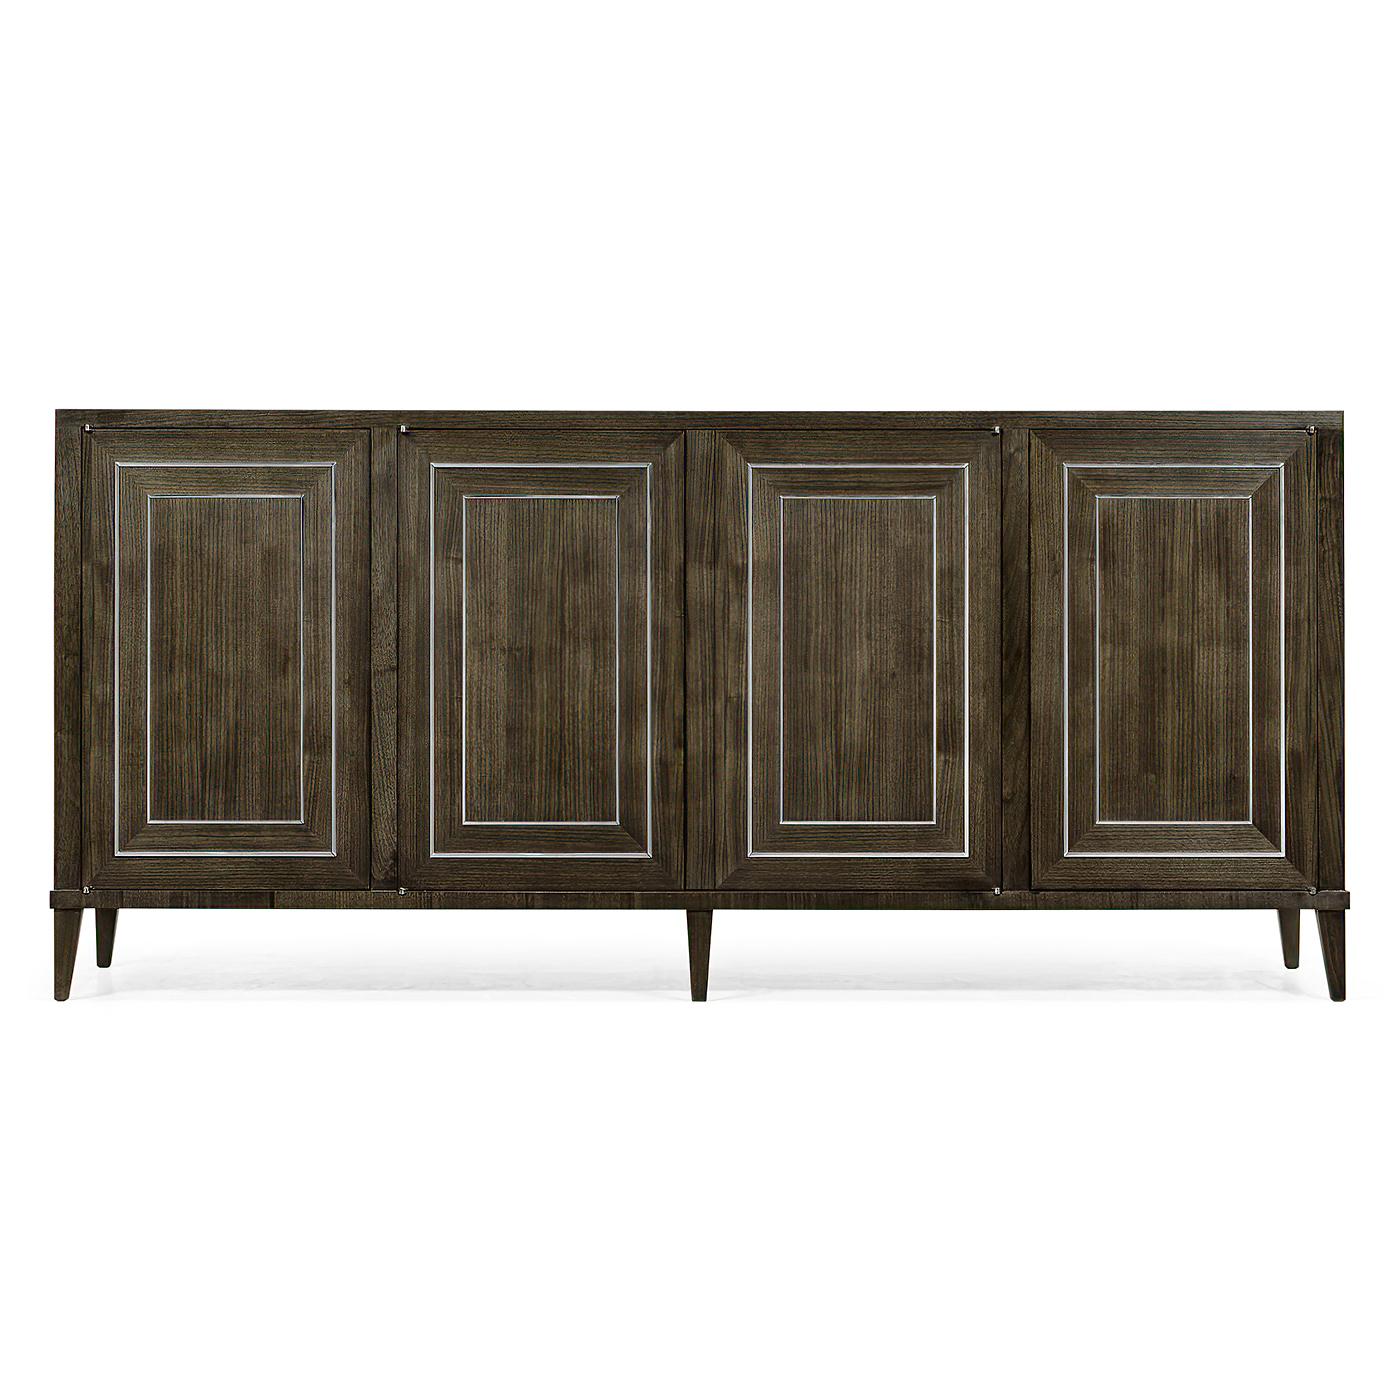 An Art Deco style greyed walnut sideboard with stainless steel inlaid details. The four cabinet doors open to reveal two open cabinets on either end with adjustable shelves and the double center section opens to reveal a long drawer and lower shelf.